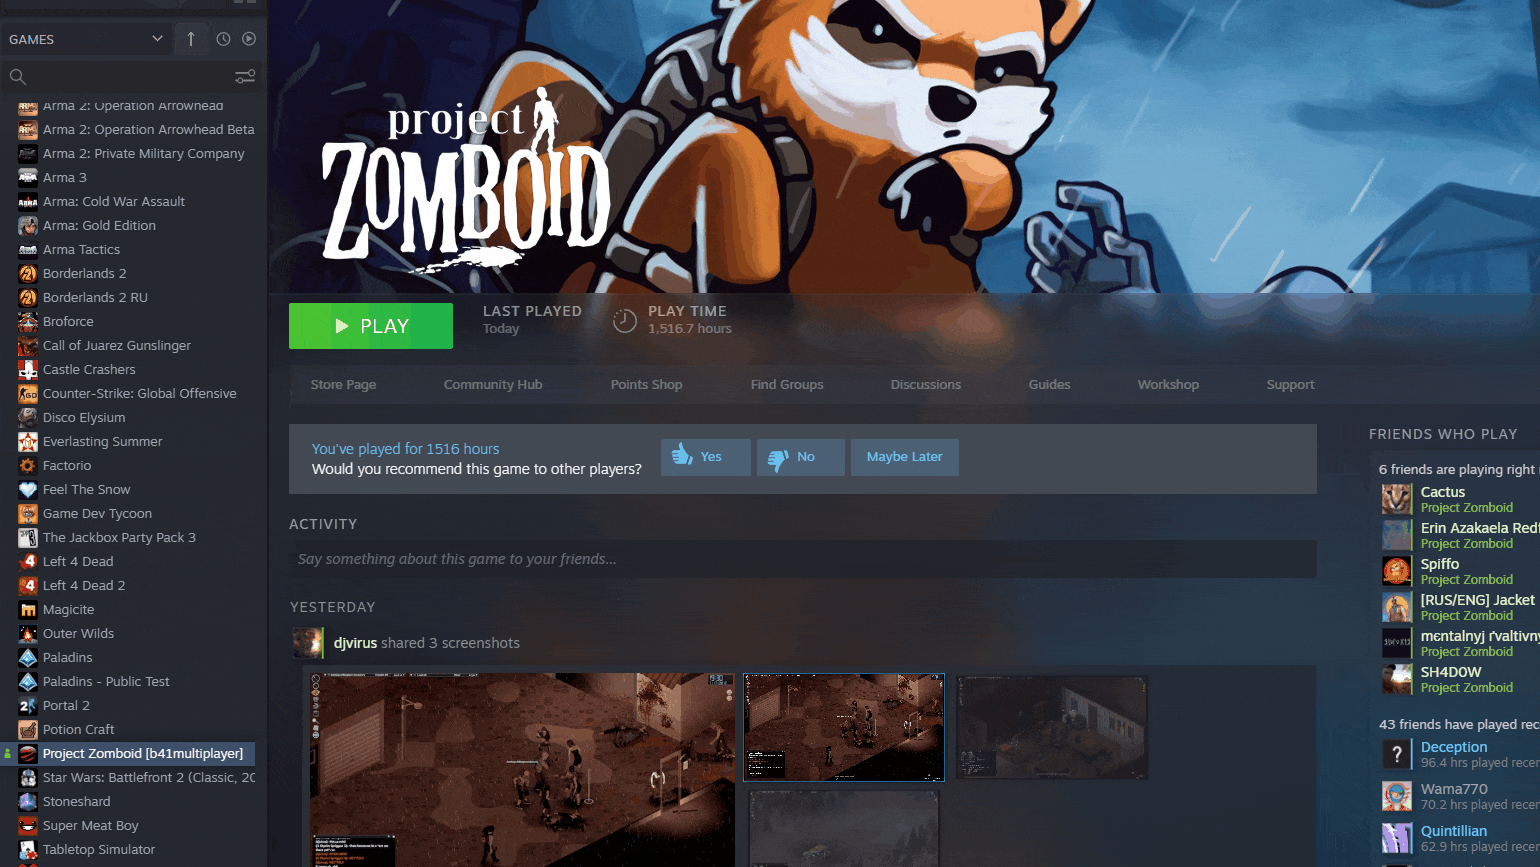 Project Zomboid Multiplayer Guide/Host Server - How to create a Steam dedicated server. - 805B2EF